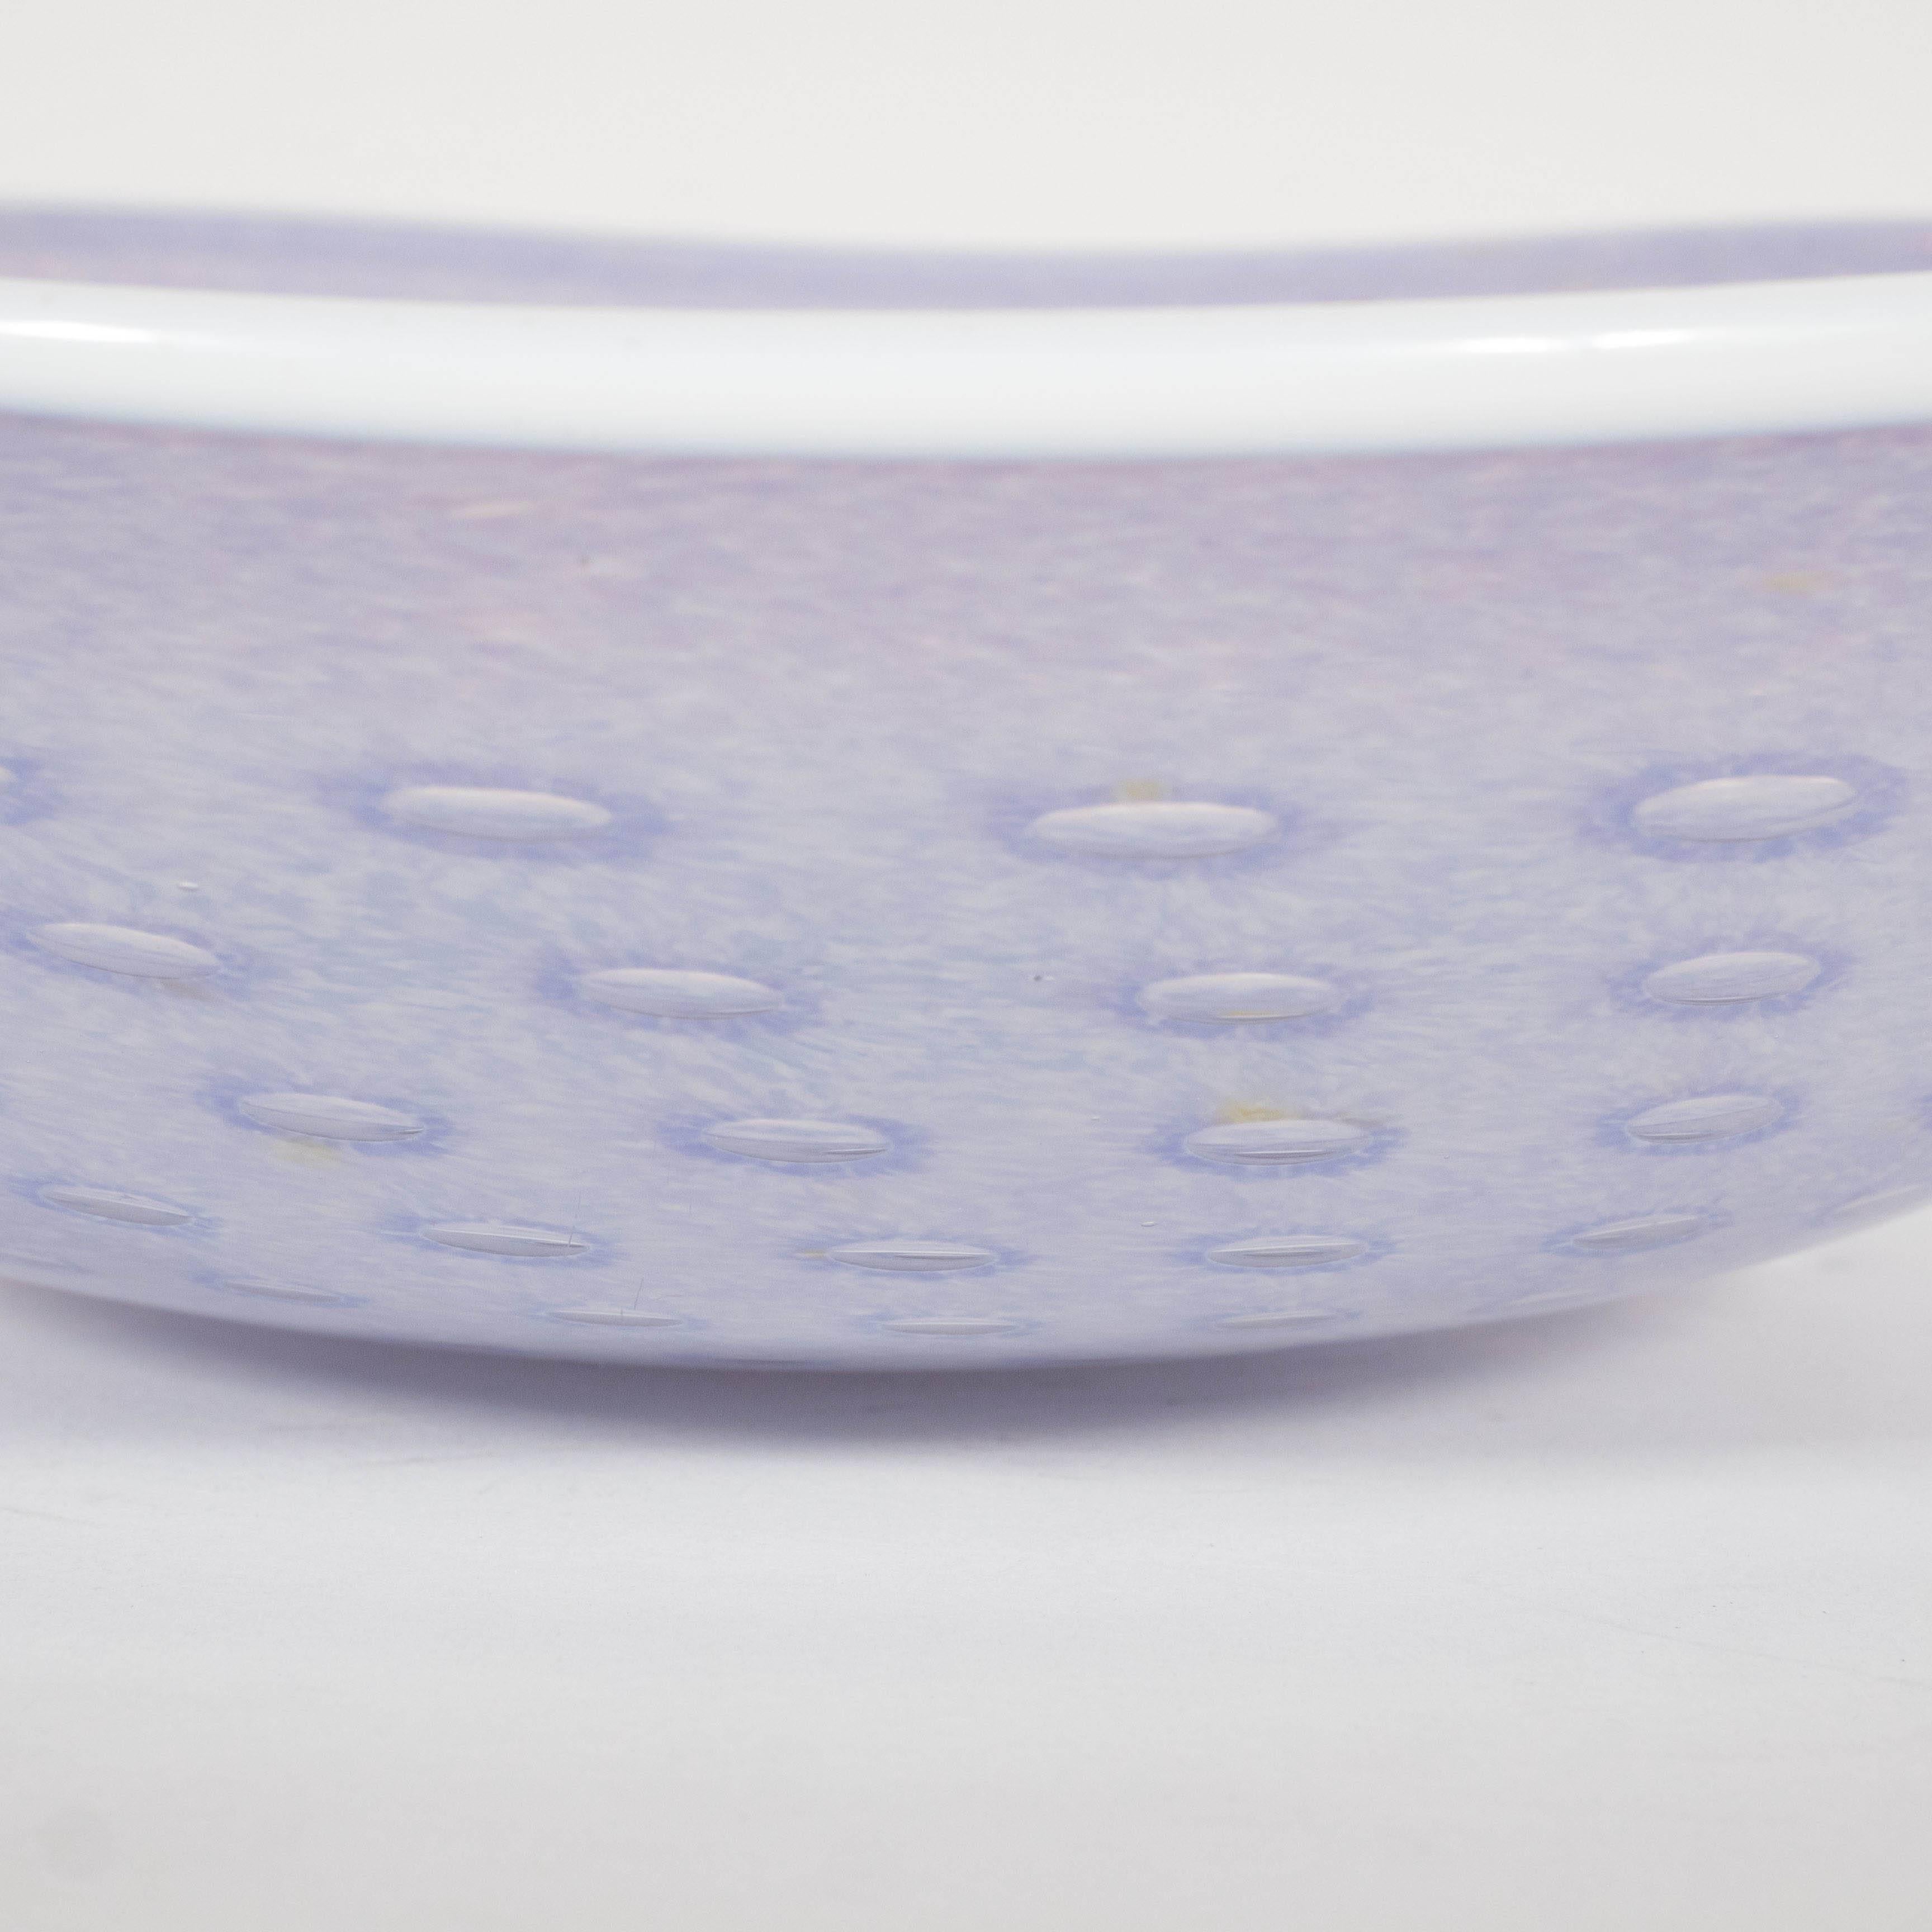 Translucent Handblown Murano Glass Bowl in Whites and Pale Lavender 1